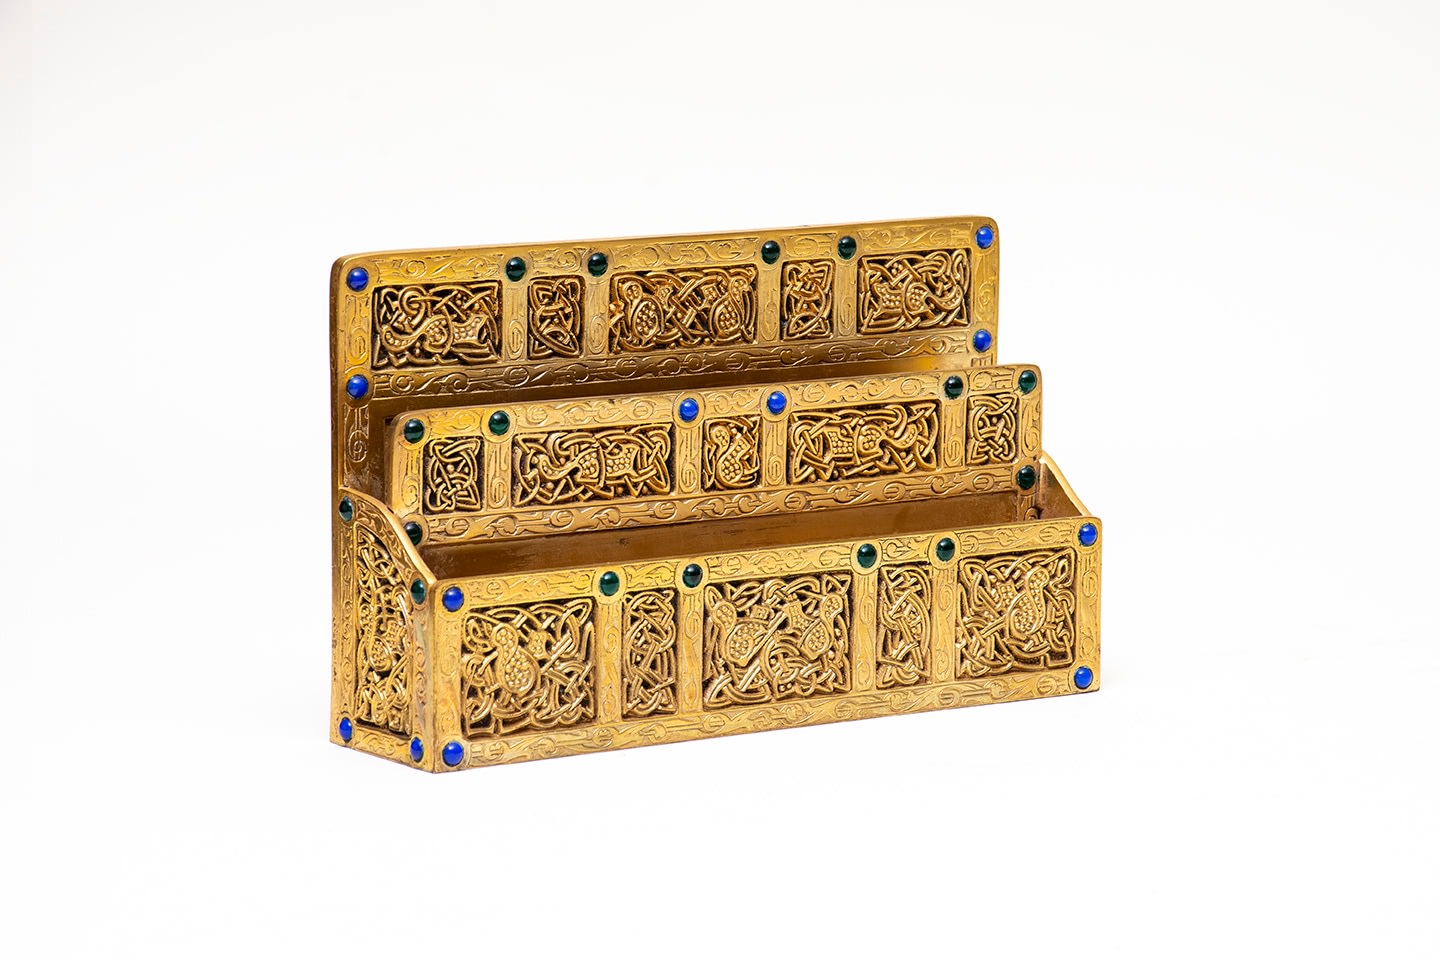 a gilt bronze letter rack with stylized carved decoration on flat planes in medieval style depicting animals like hares and squirrels, surrounded by elaborate strapwork and knotwork decoration, with small rounded glass jewels in blue and green